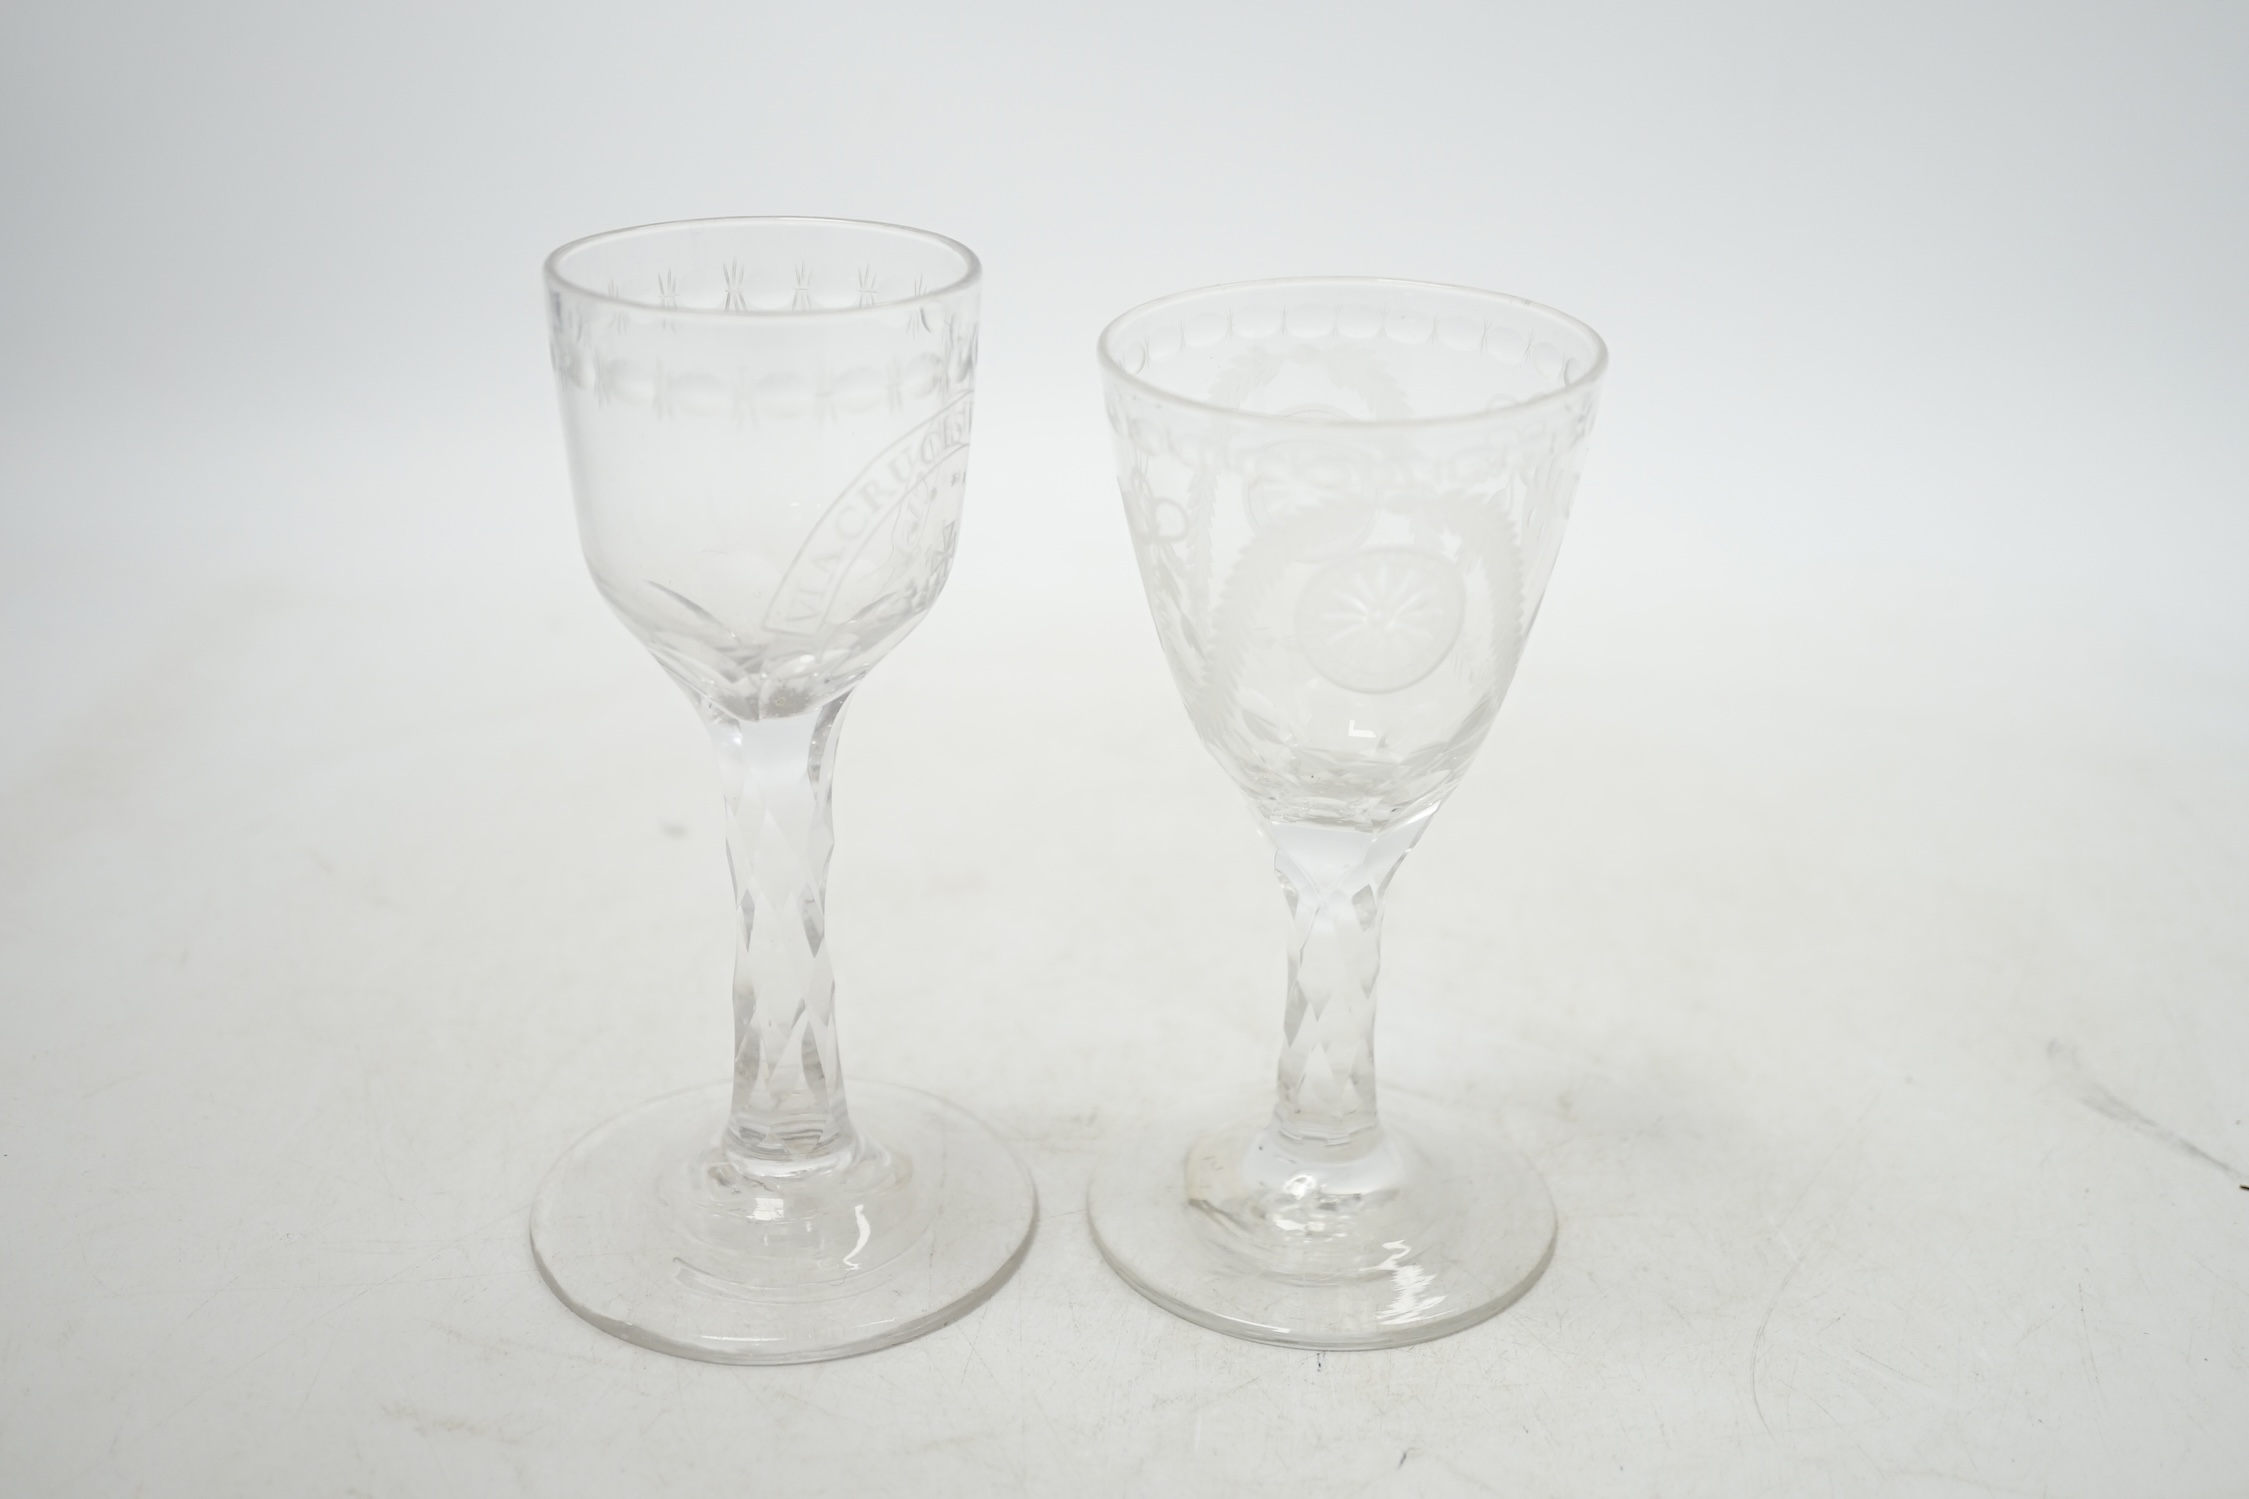 Two 18th century wine glasses with faceted stems, both with engraved bowls, one neo-classical and one reading ‘Via Crucis Via Lucis’, tallest 13.5cm. Condition - good